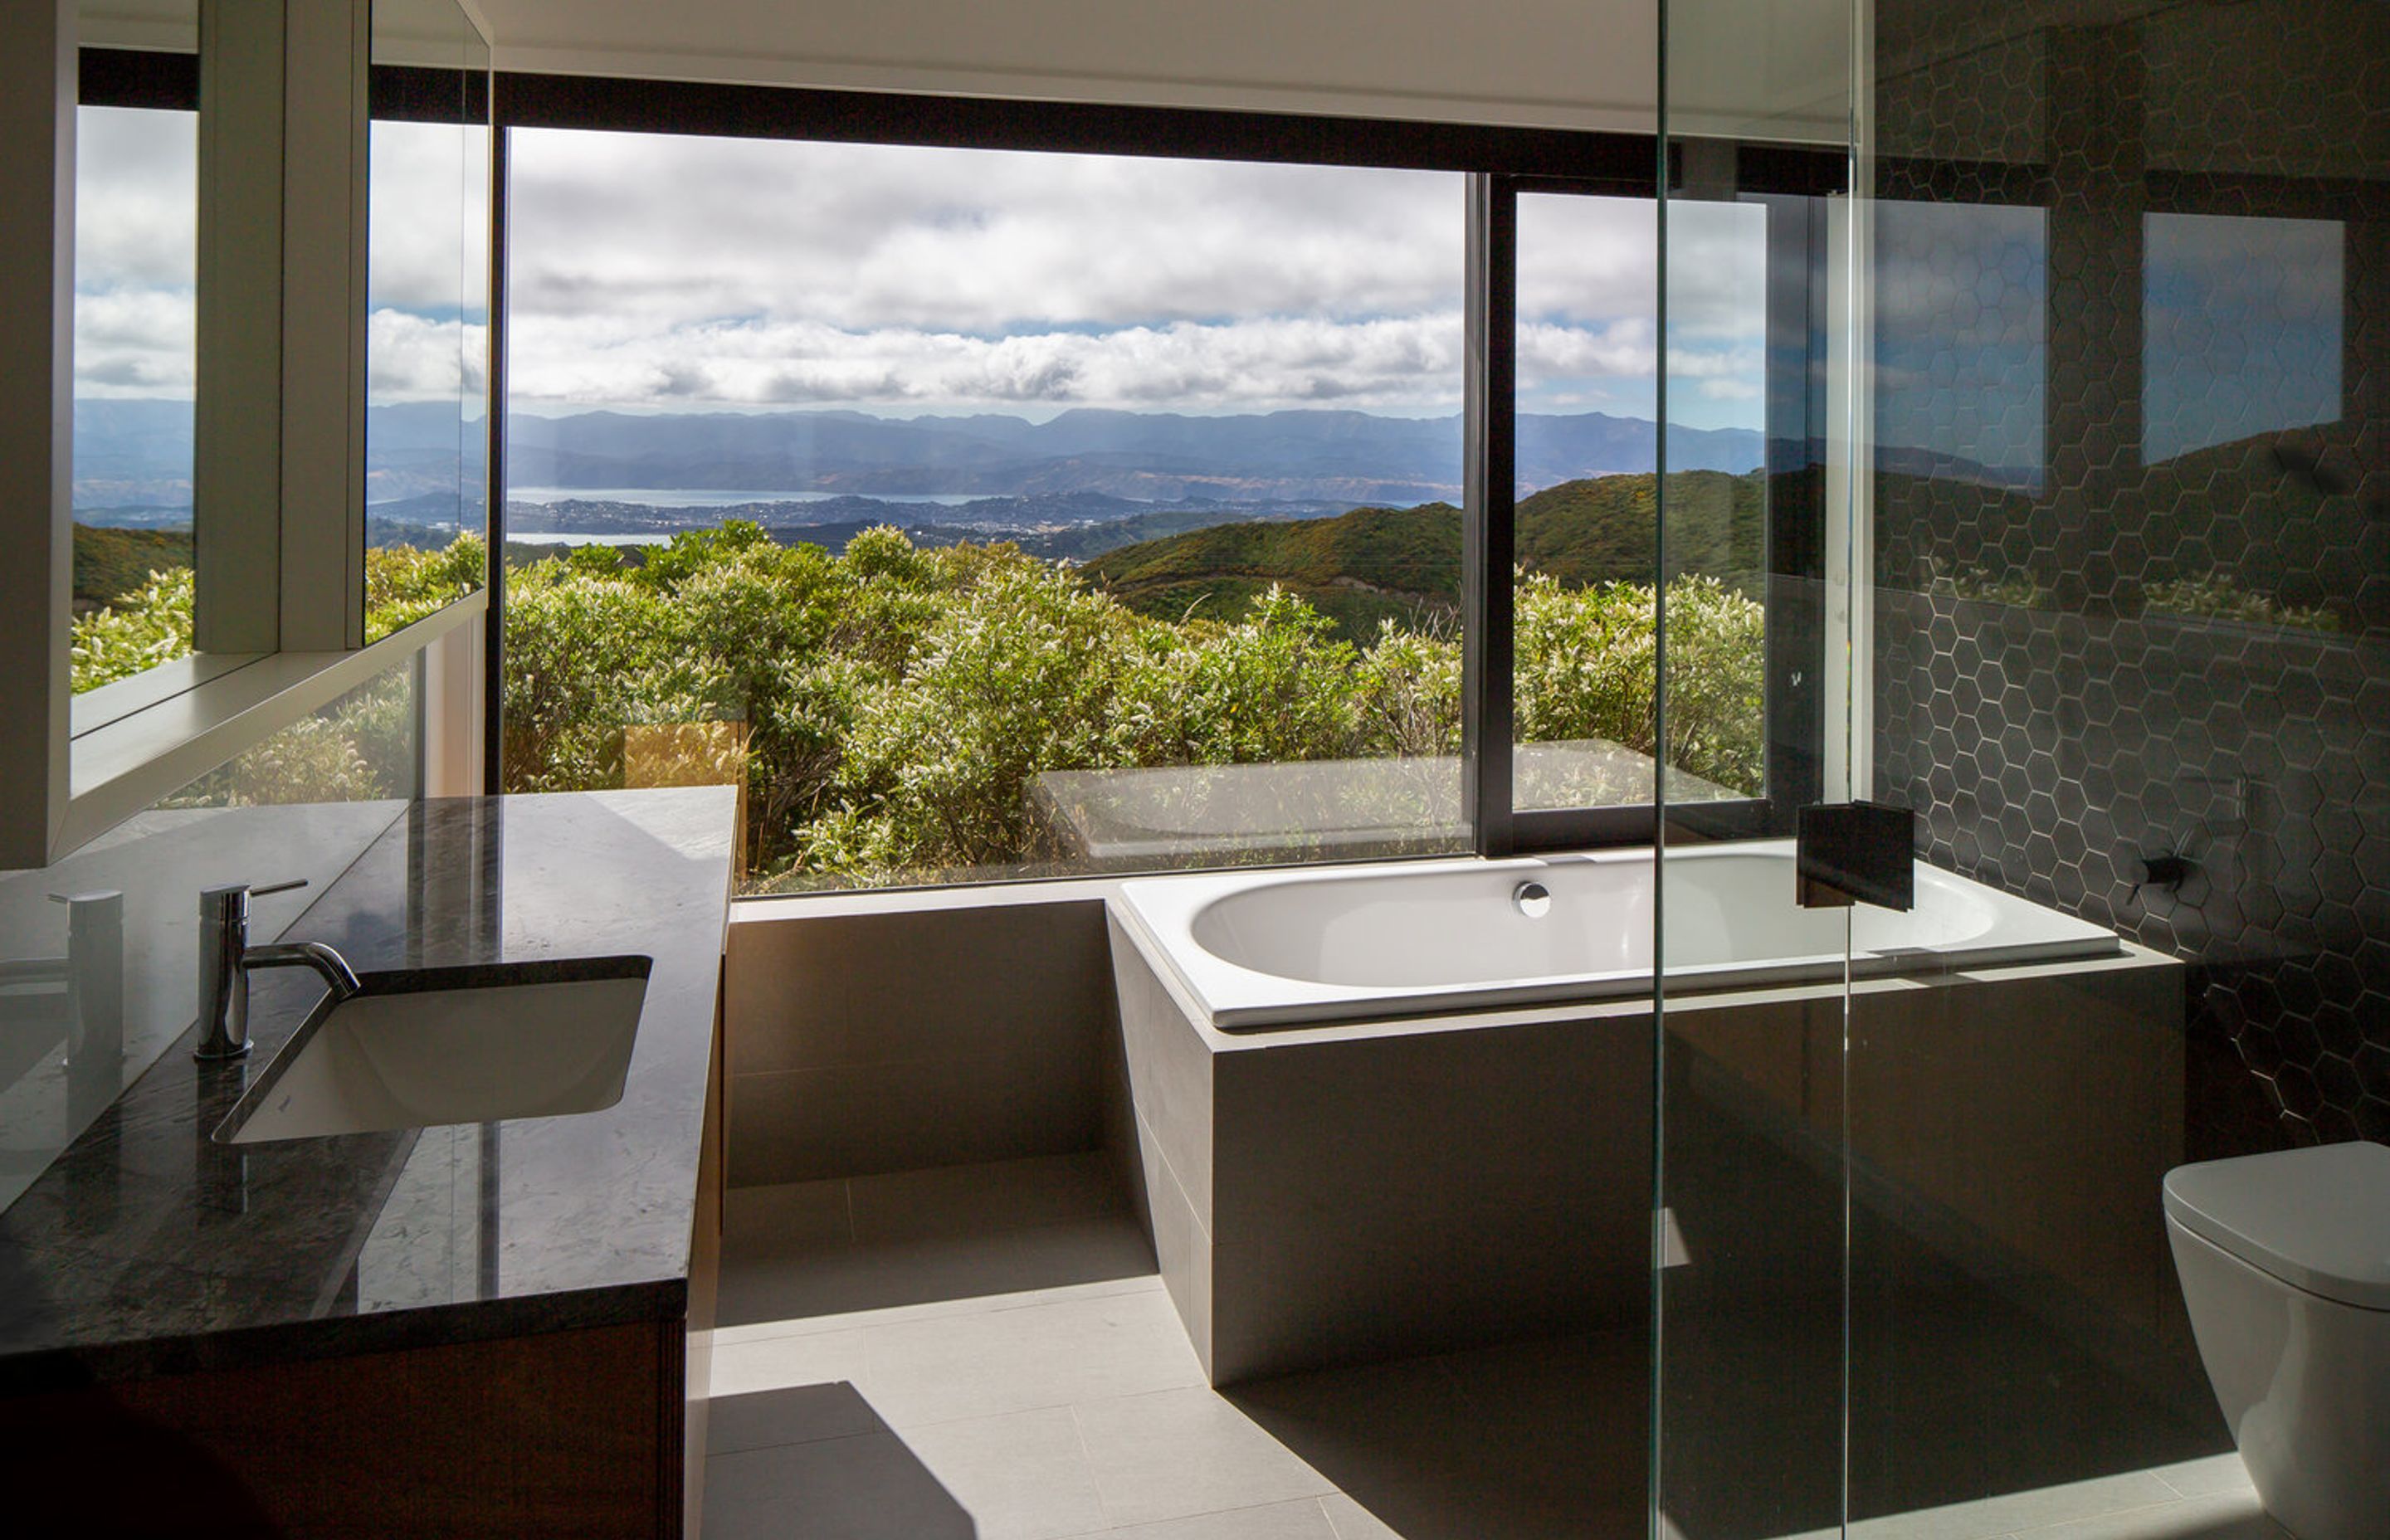 The owners enjoy sitting in this bath surrounded by the fringe of bush and Wellington city is just 10 minutes drive away.